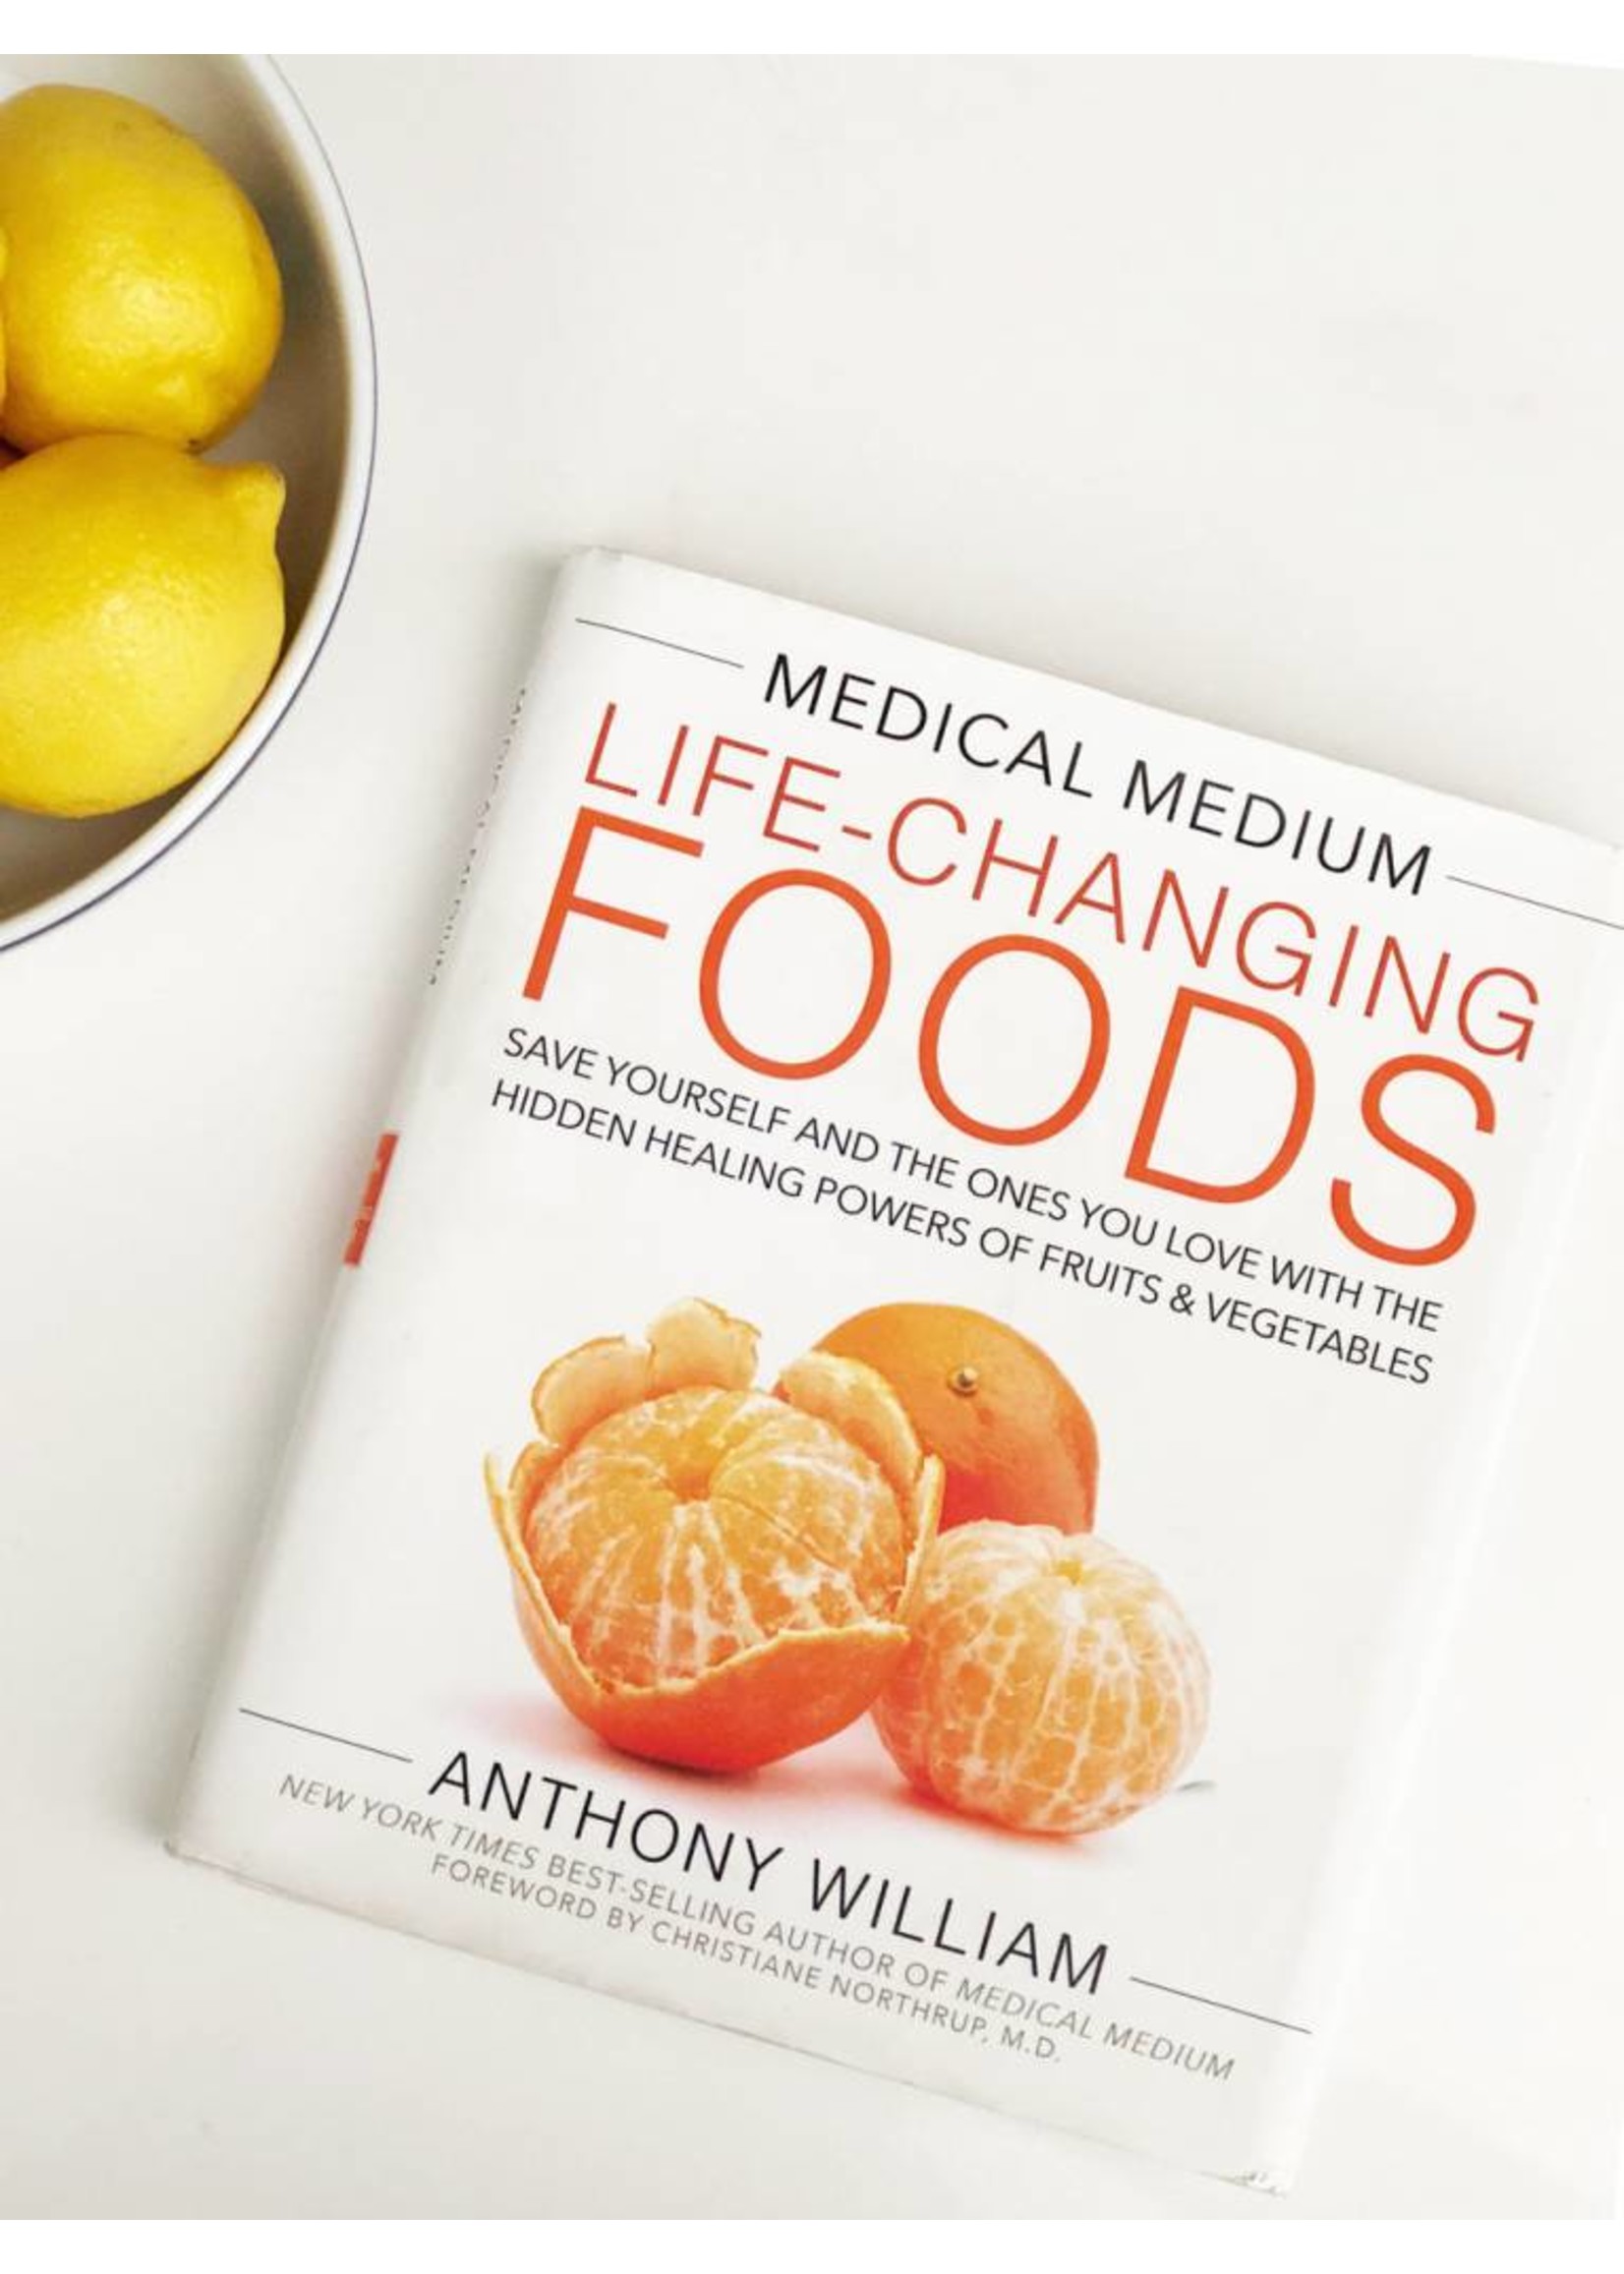 Medical Medium Life-Changing Foods | Save Yourself and the Ones You Love with the Hidden Healing Powers of Fruits & Vegetables